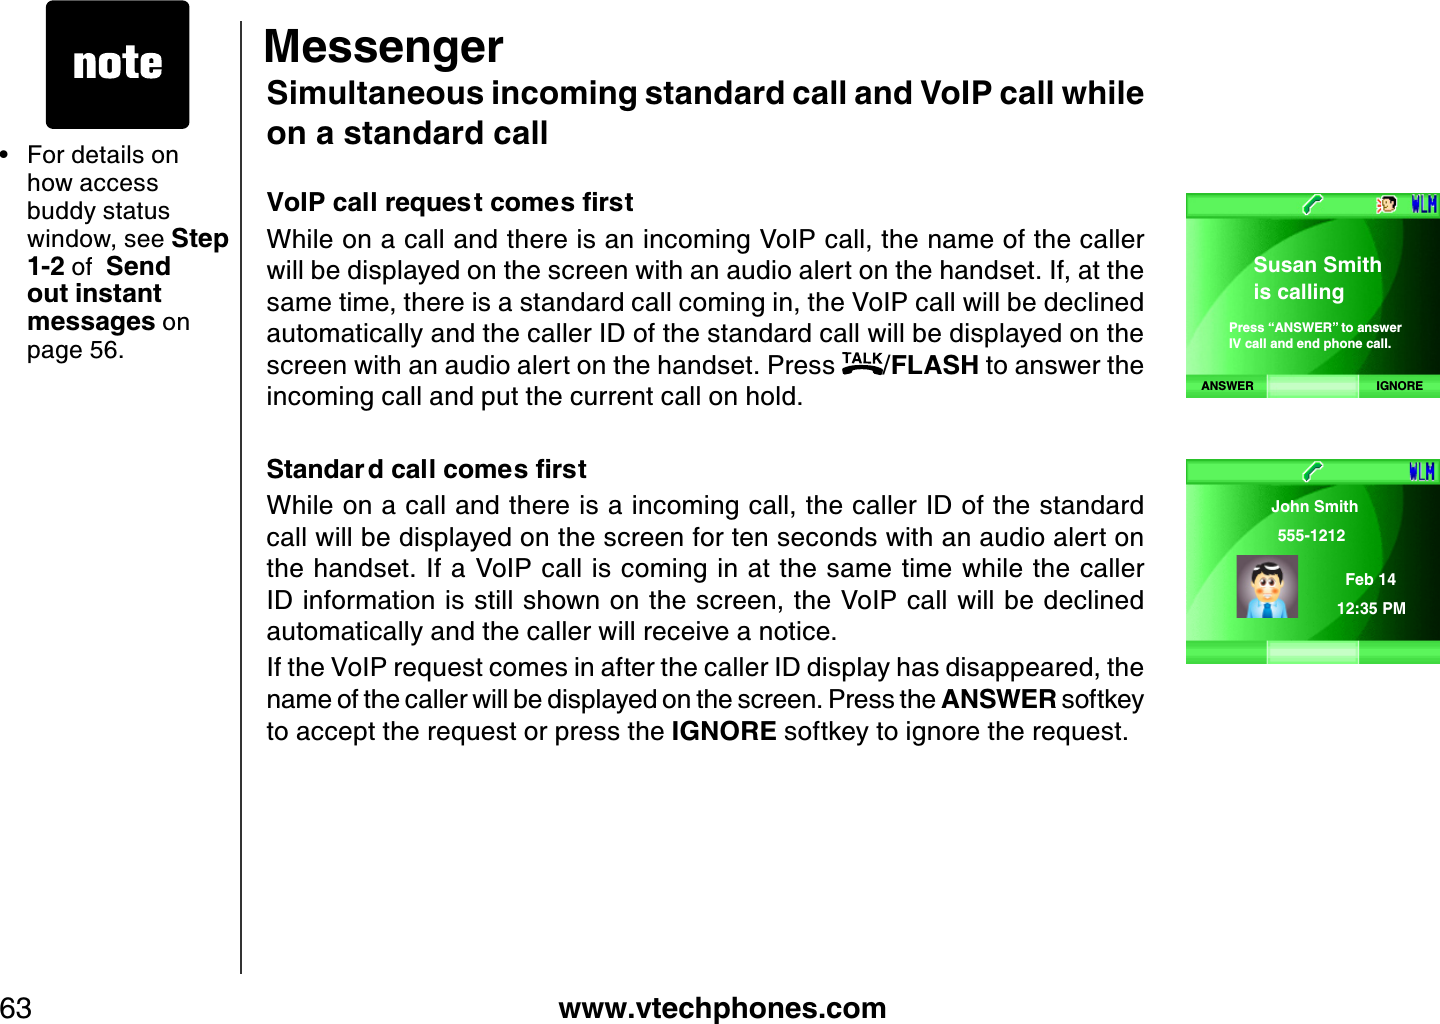 www.vtechphones.com63Simultaneous incoming standard call and VoIP call while on a standard call8Q+2ECNNTGSWGUVEQOGUſTUVWhile on a call and there is an incoming VoIP call, the name of the caller will be displayed on the screen with an audio alert on the handset. If, at the same time, there is a standard call coming in, the VoIP call will be declined automatically and the caller ID of the standard call will be displayed on the screen with an audio alert on the handset. Press  /FLASH to answer the incoming call and put the current call on hold.5VCPFCT FECNNEQOGUſTUVWhile on a call and there is a incoming call, the caller ID of the standard call will be displayed on the screen for ten seconds with an audio alert on the handset. If a VoIP call is coming in at the same time while the caller ID information is still shown on the screen, the VoIP call will be declined automatically and the caller will receive a notice.If the VoIP request comes in after the caller ID display has disappeared, the name of the caller will be displayed on the screen. Press the ANSWER softkey to accept the request or press the IGNORE softkey to ignore the request.For details on how access buddy status window, see Step 1-2  of  Send out instant messages on page 56.•MessengerANSWER IGNORESusan Smithis callingPress “ANSWER” to answerIV call and end phone call.John Smith 555-1212Feb 14 12:35 PM 